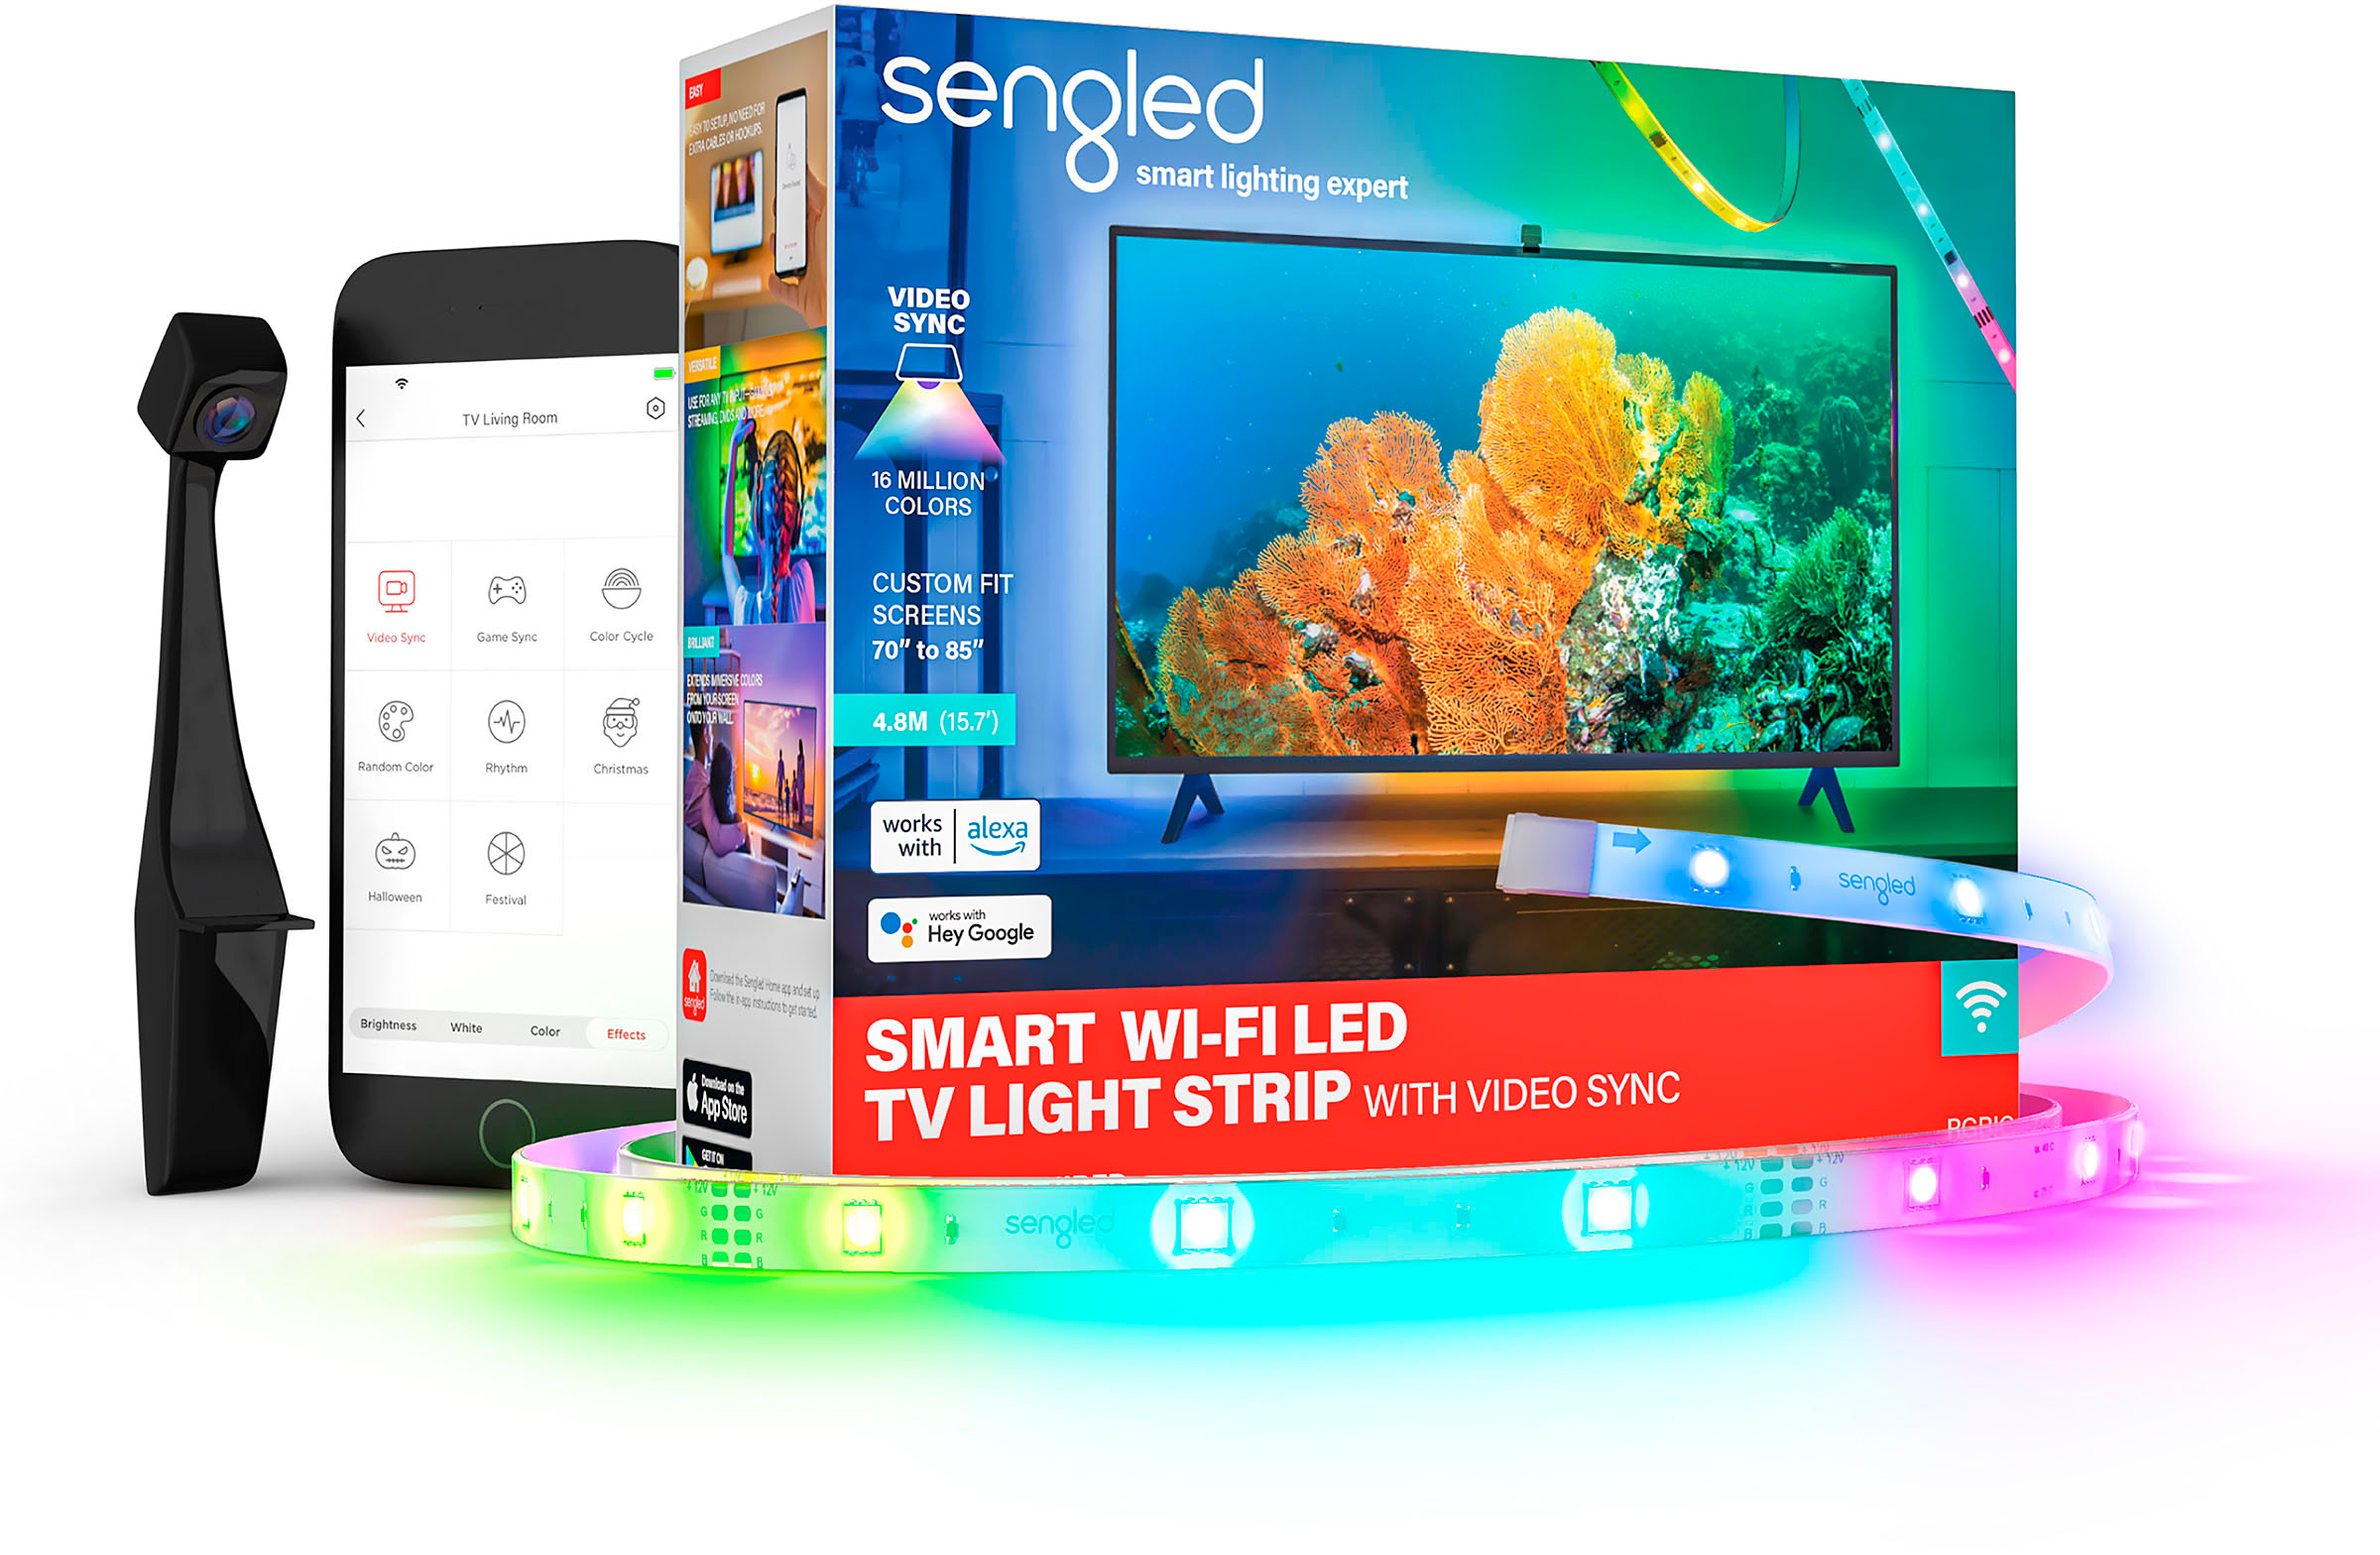 Sengled Smart LED Wi-Fi TV Light Strip with Video Sync for 70 to